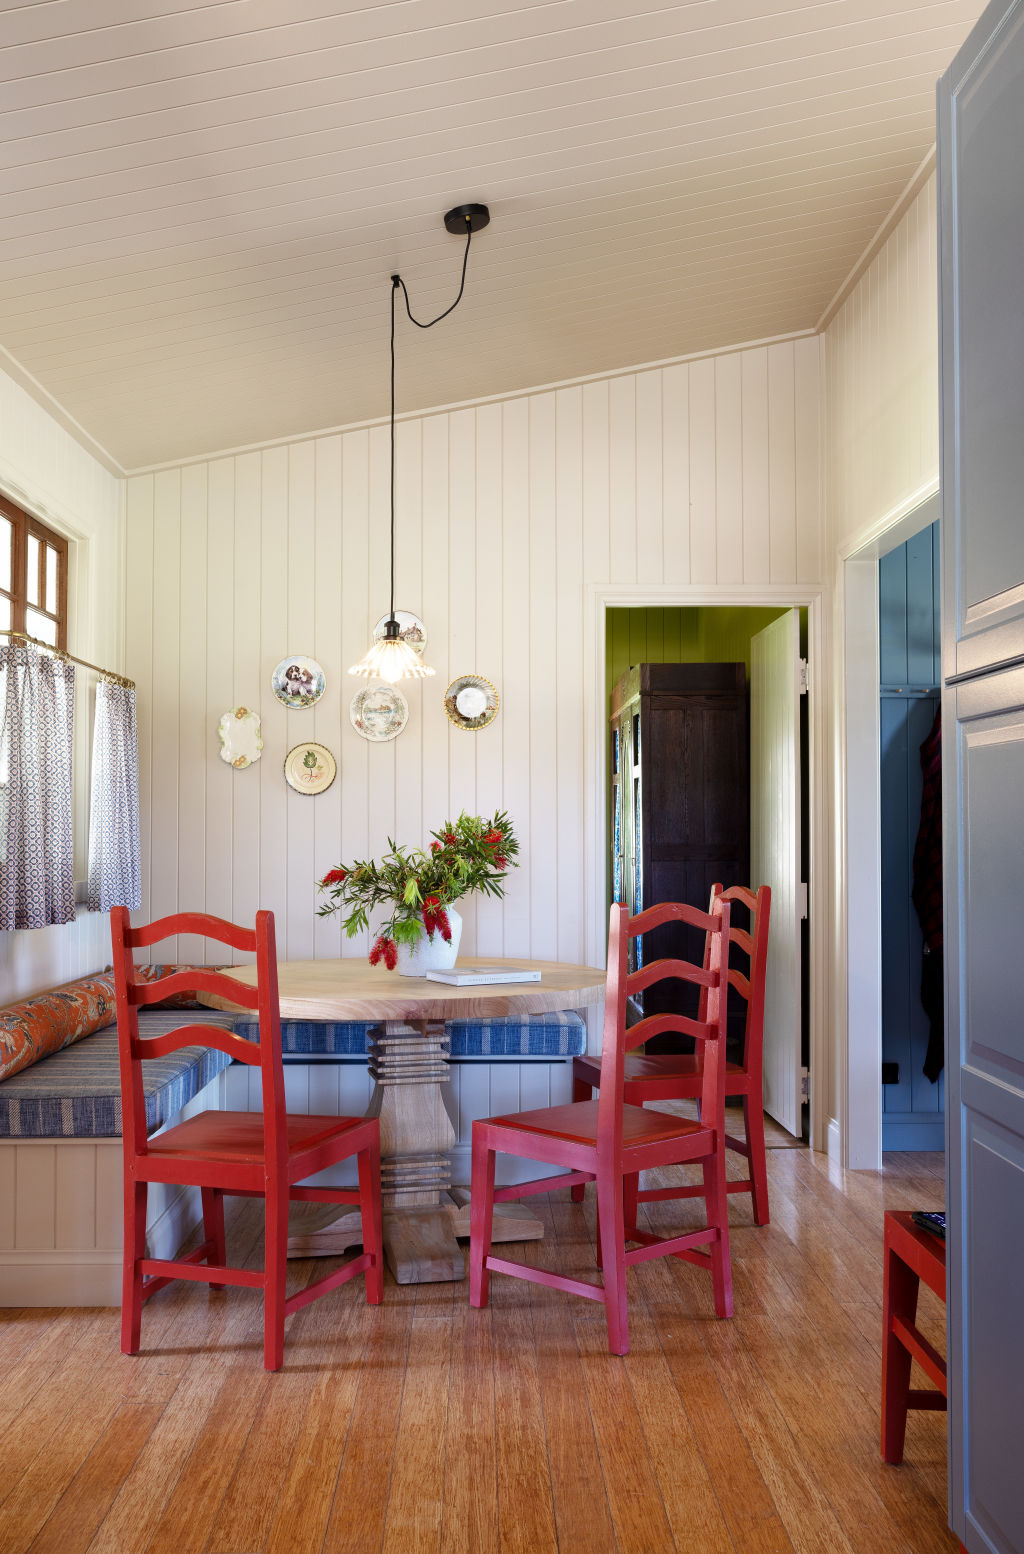 For Georgina, there was immense satisfaction in seeing her beloved family cottage come alive with creativity and colour. Photo: Louise Roche